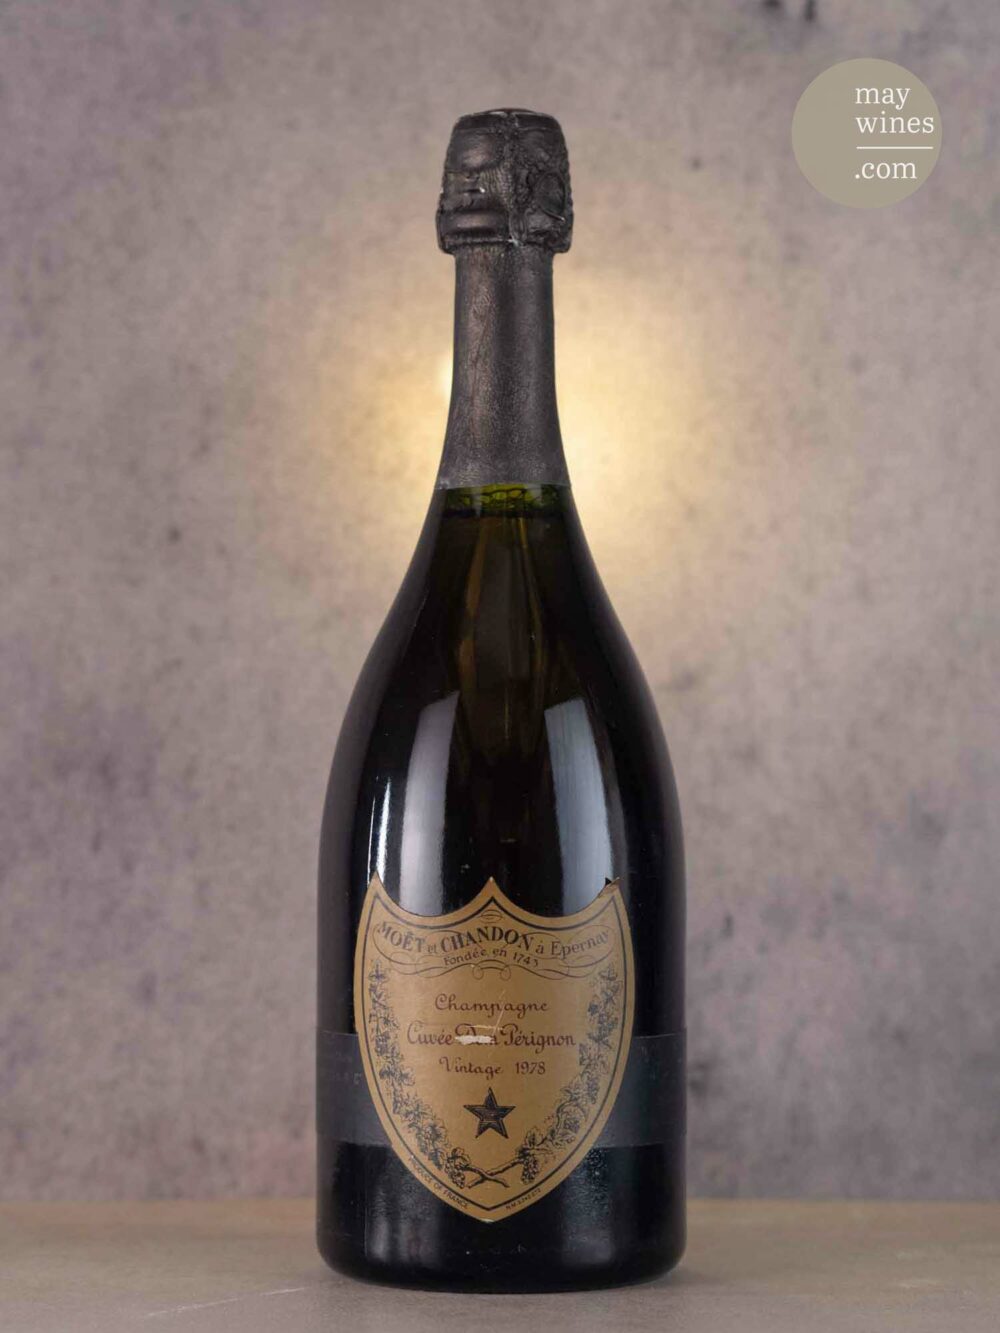 May Wines – Champagner – 1978 Dom Pérignon - Moët & Chandon